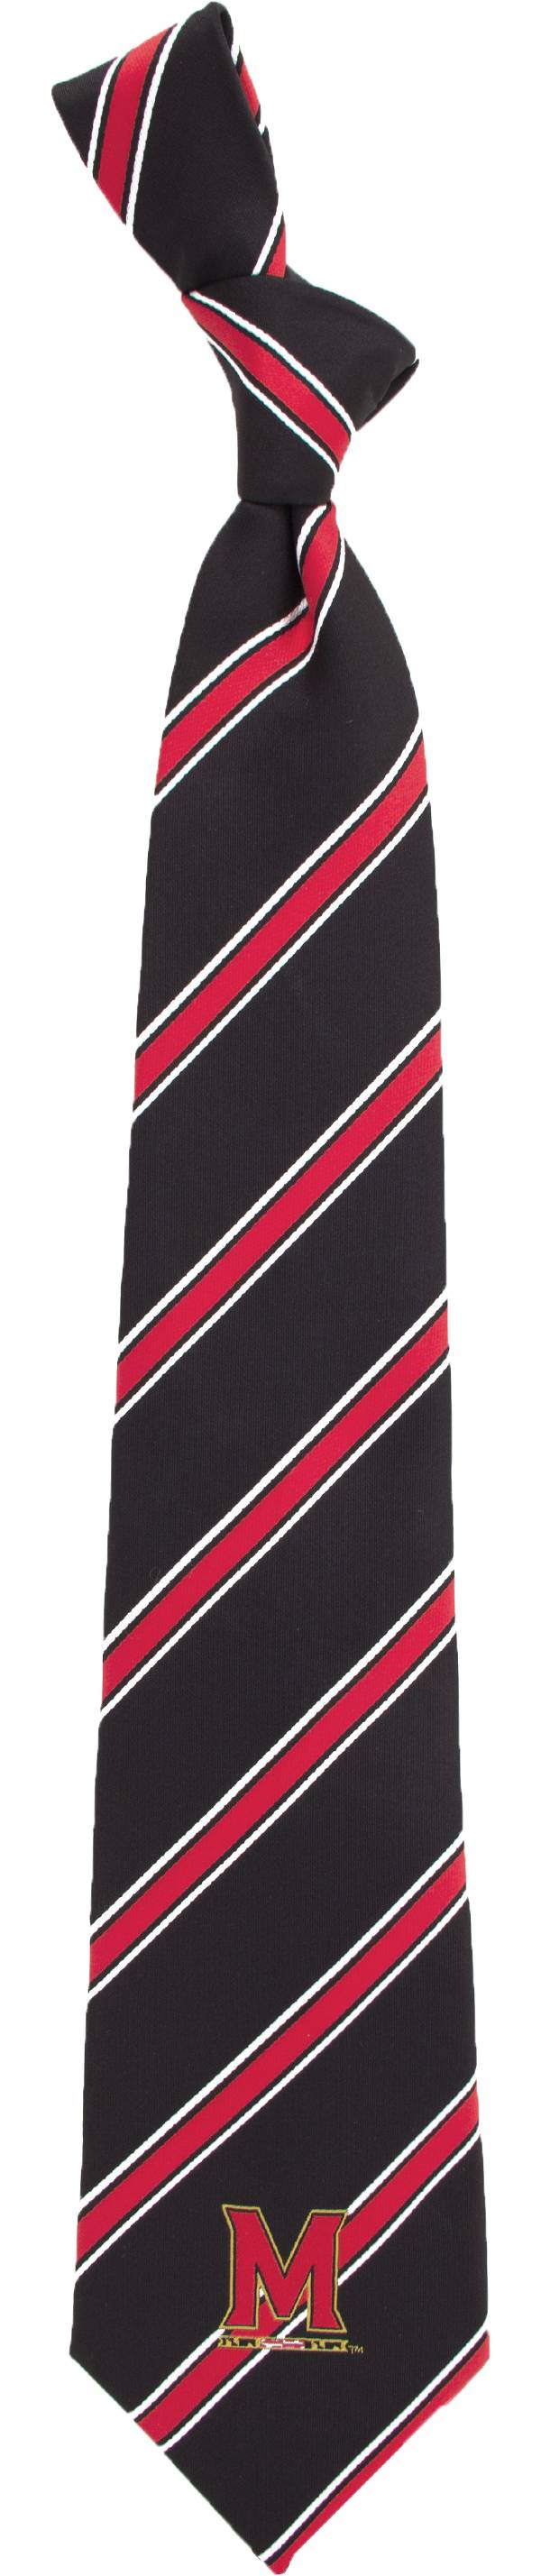 Eagles Wings Maryland Terrapins Woven Poly 1 Necktie product image